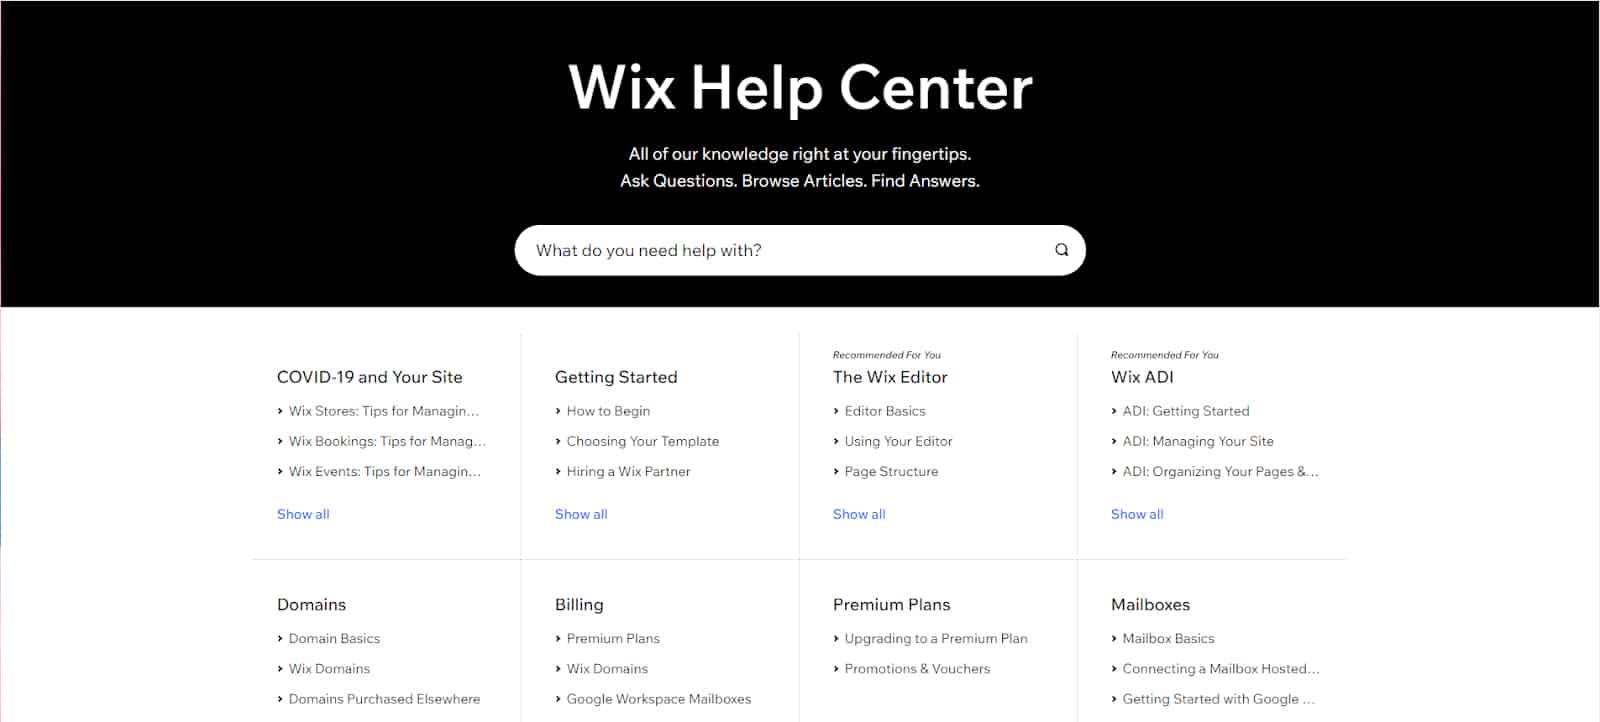 Wix help center page.